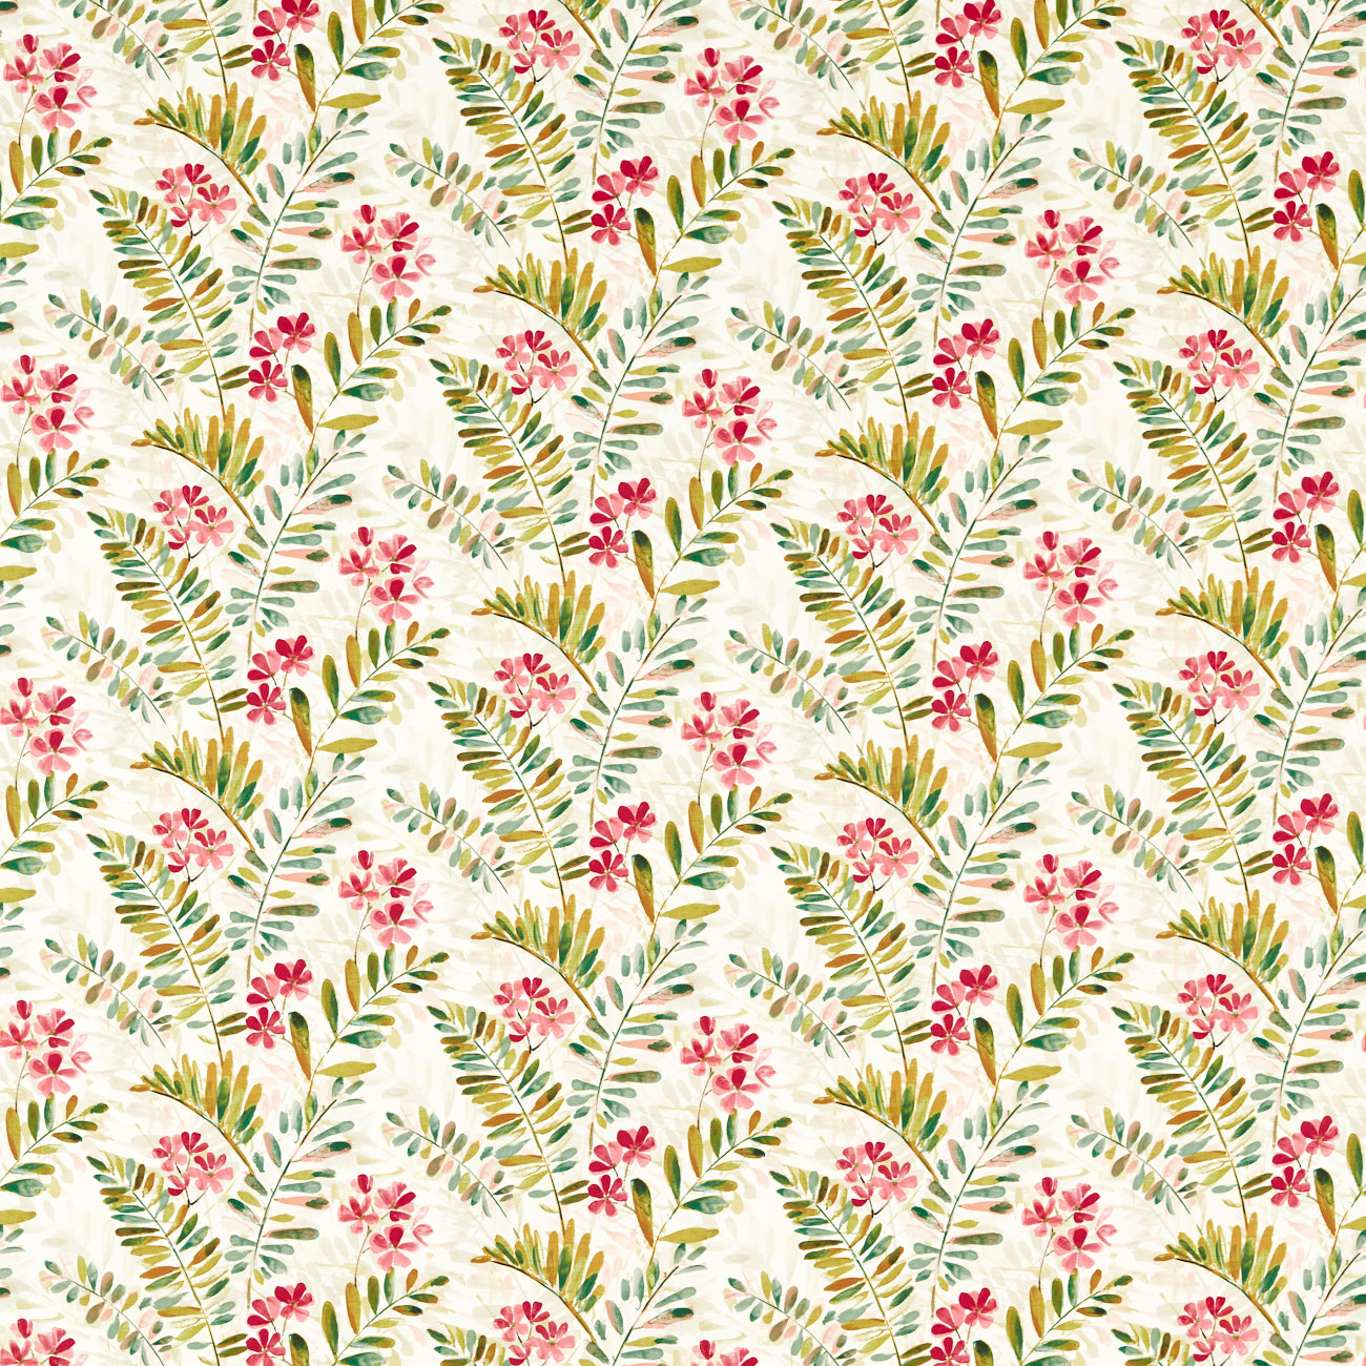 New Grove Autumn Fabric by STG